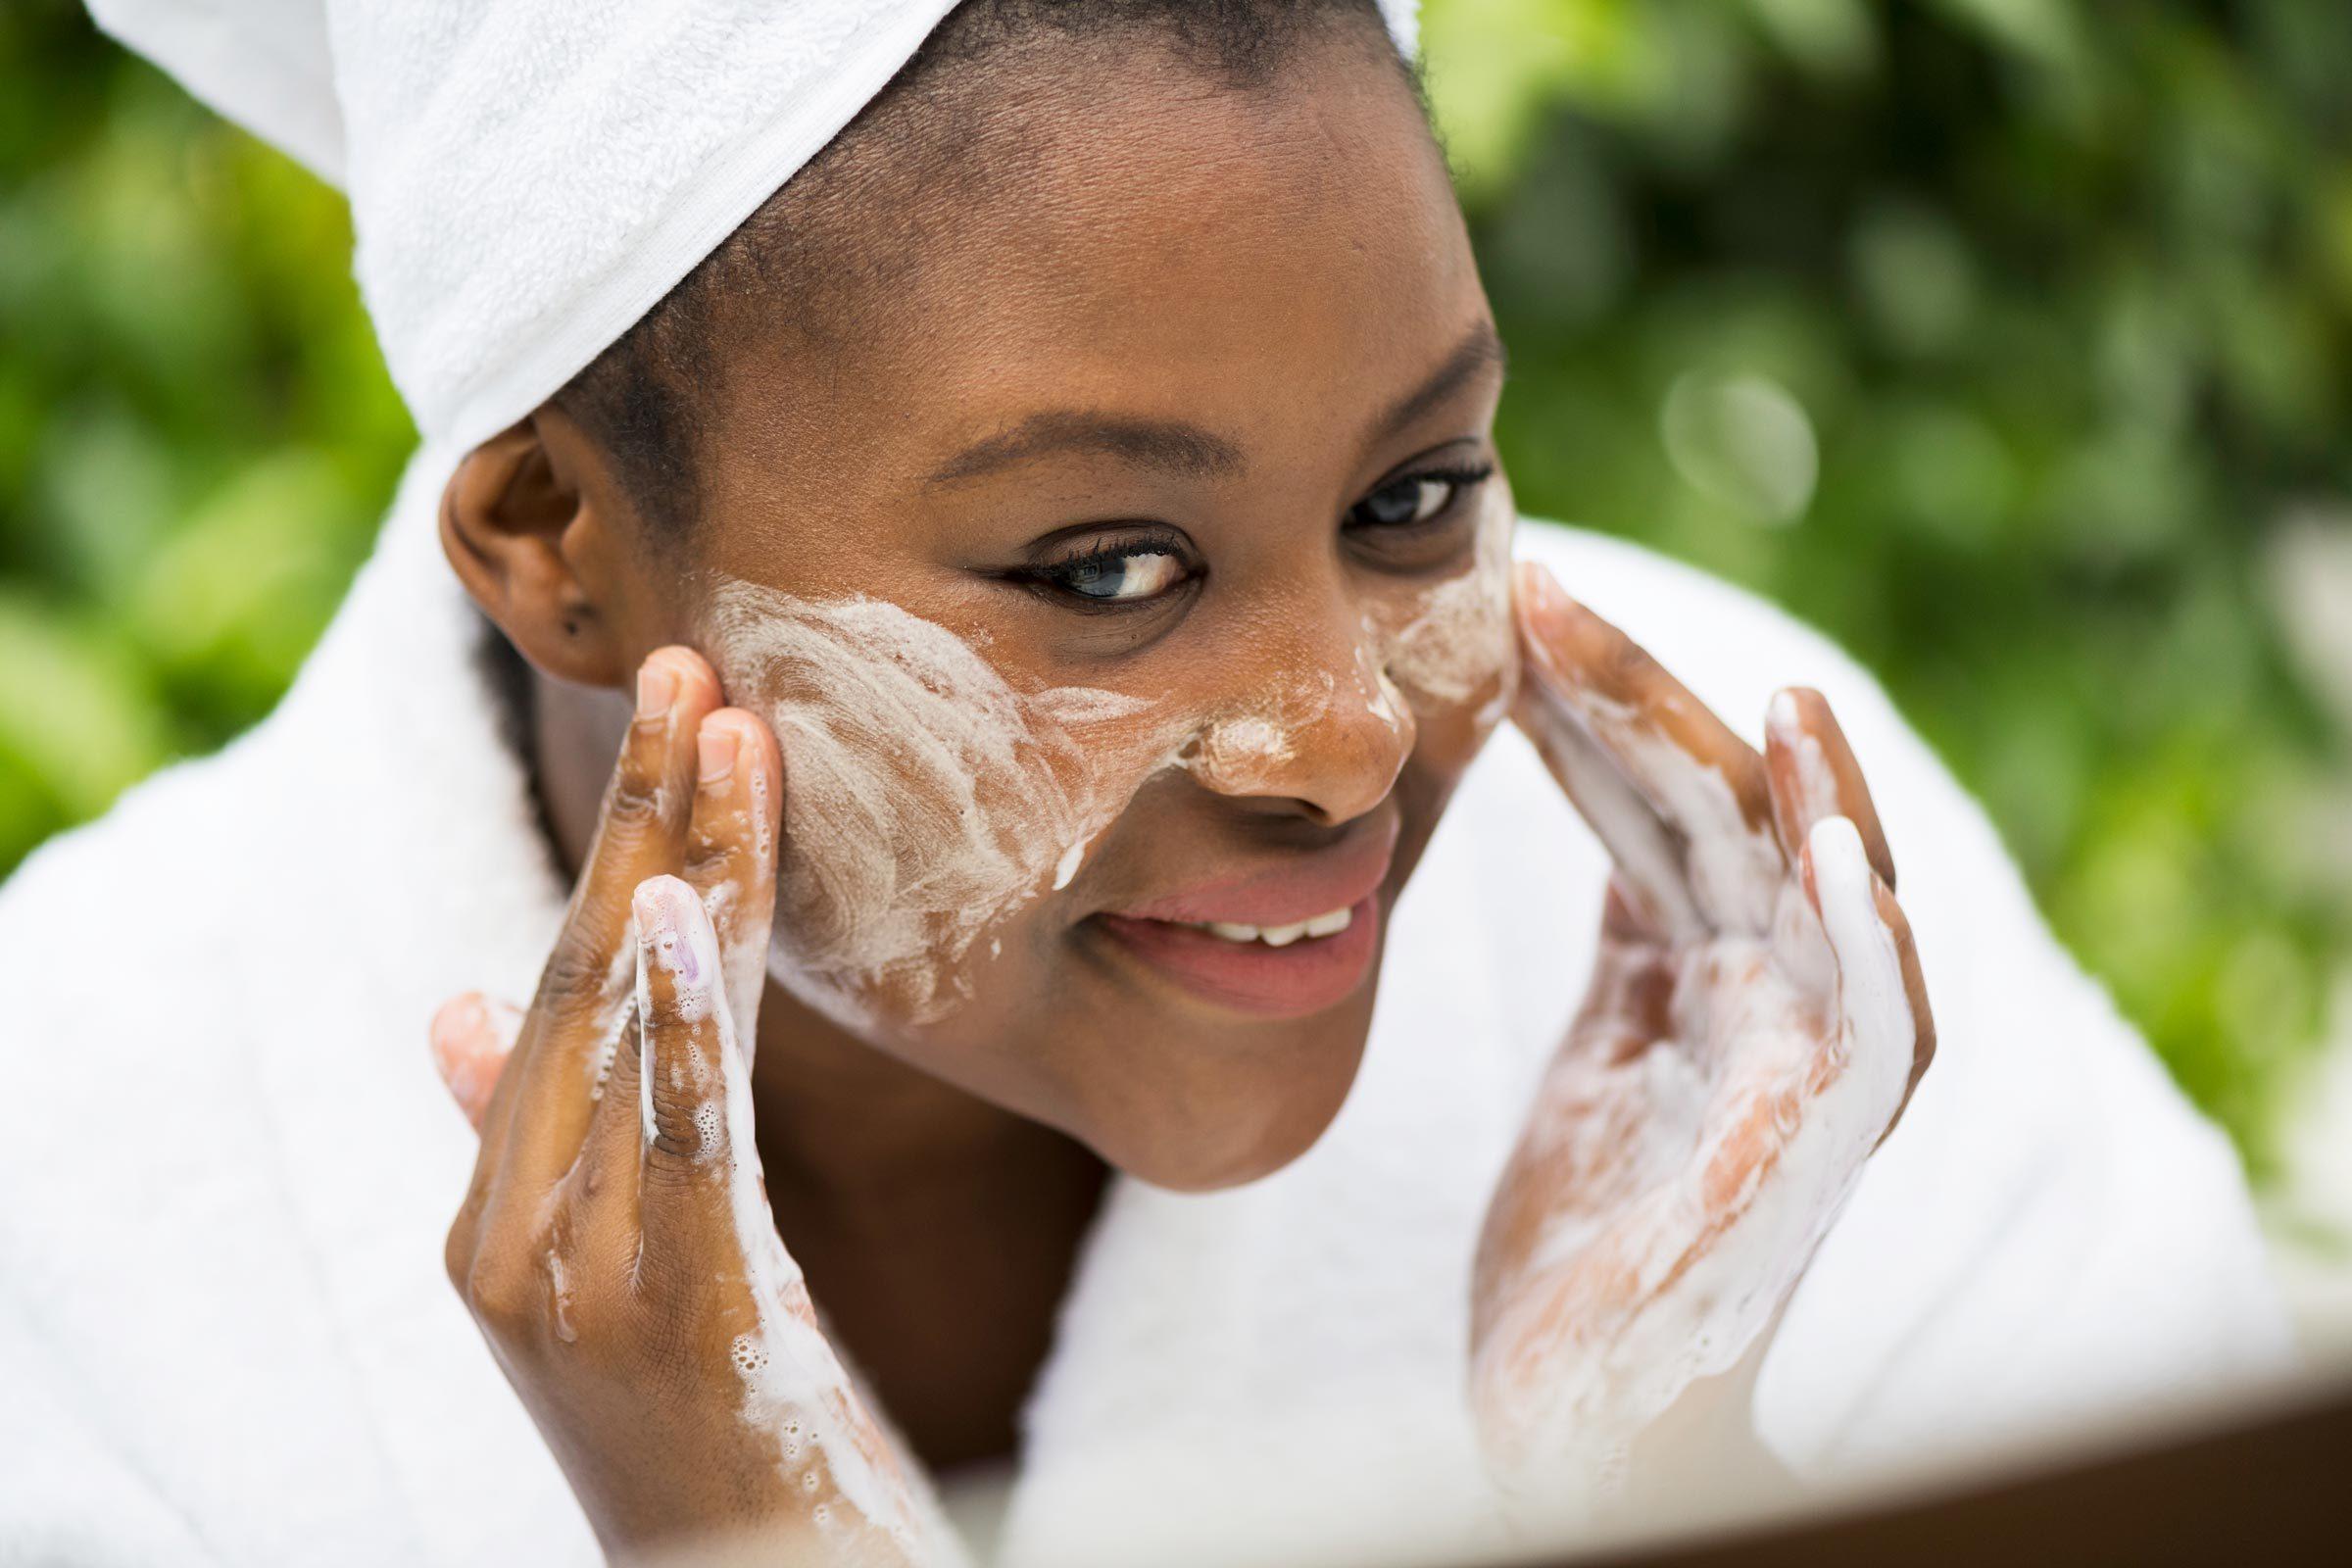 https://www.thehealthy.com/wp-content/uploads/2023/05/GettyImages-1023407786-Skin-Care-Changes-You-Should-Make-Before-Summer.jpg?resize=568%2C568